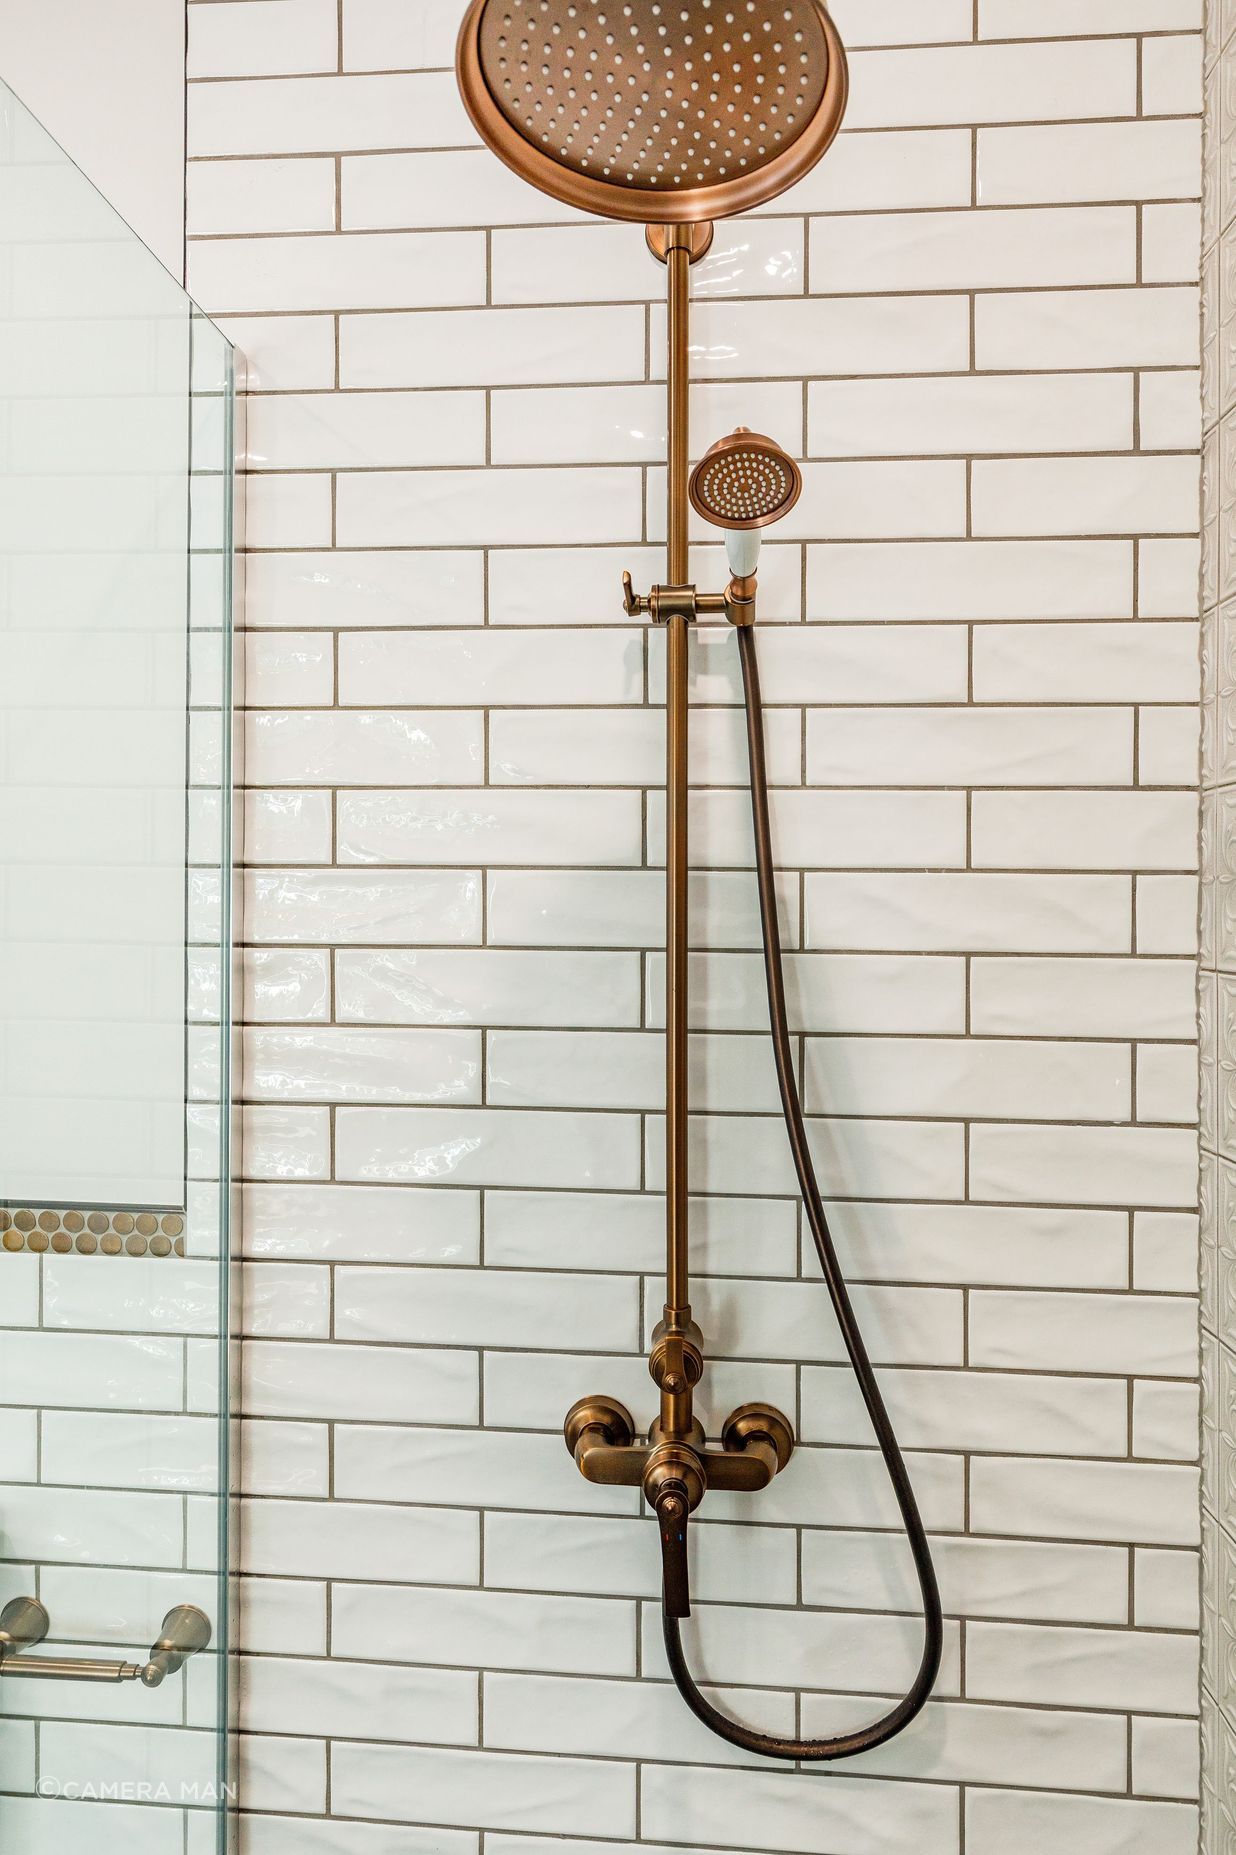 The Oil Rubbed Bronze Traditional Style Fittings of the Liberty range by Waterware accentuate the traditional charm and make true statement pieces.